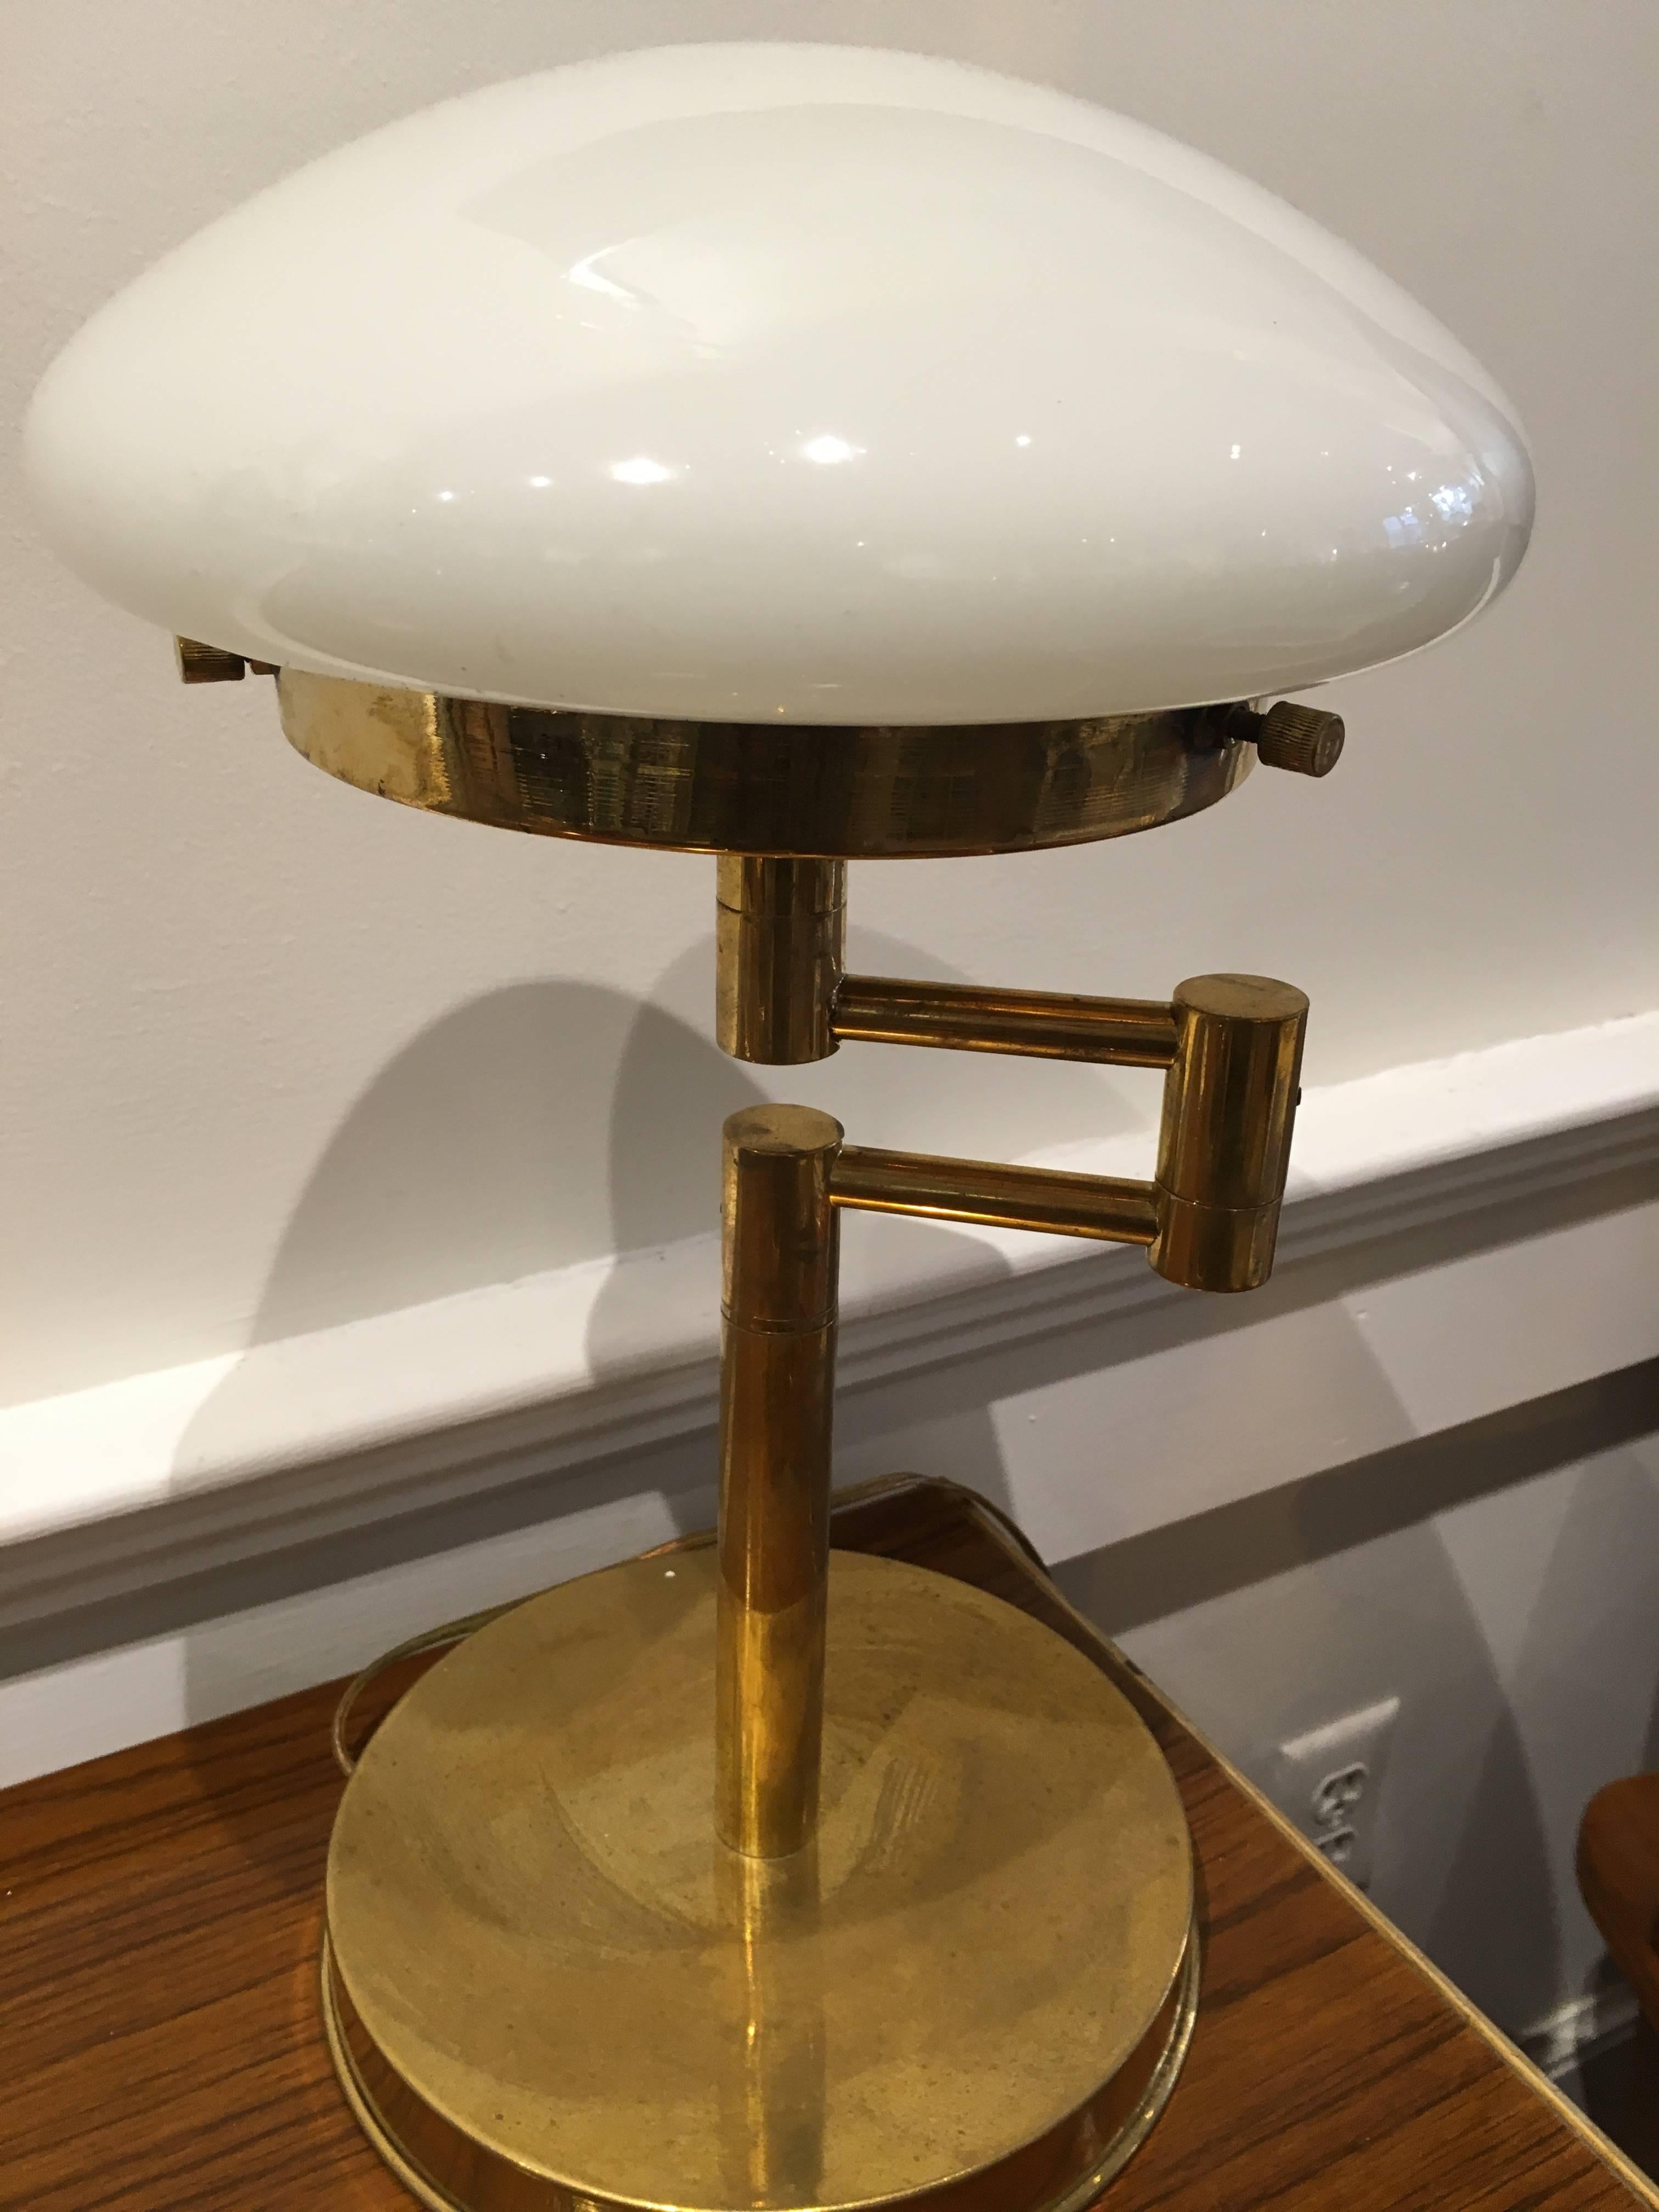 20th Century Pair of Mid-Century Modern Swing-Arm Brass Table Lamps with Milk Glass Shades